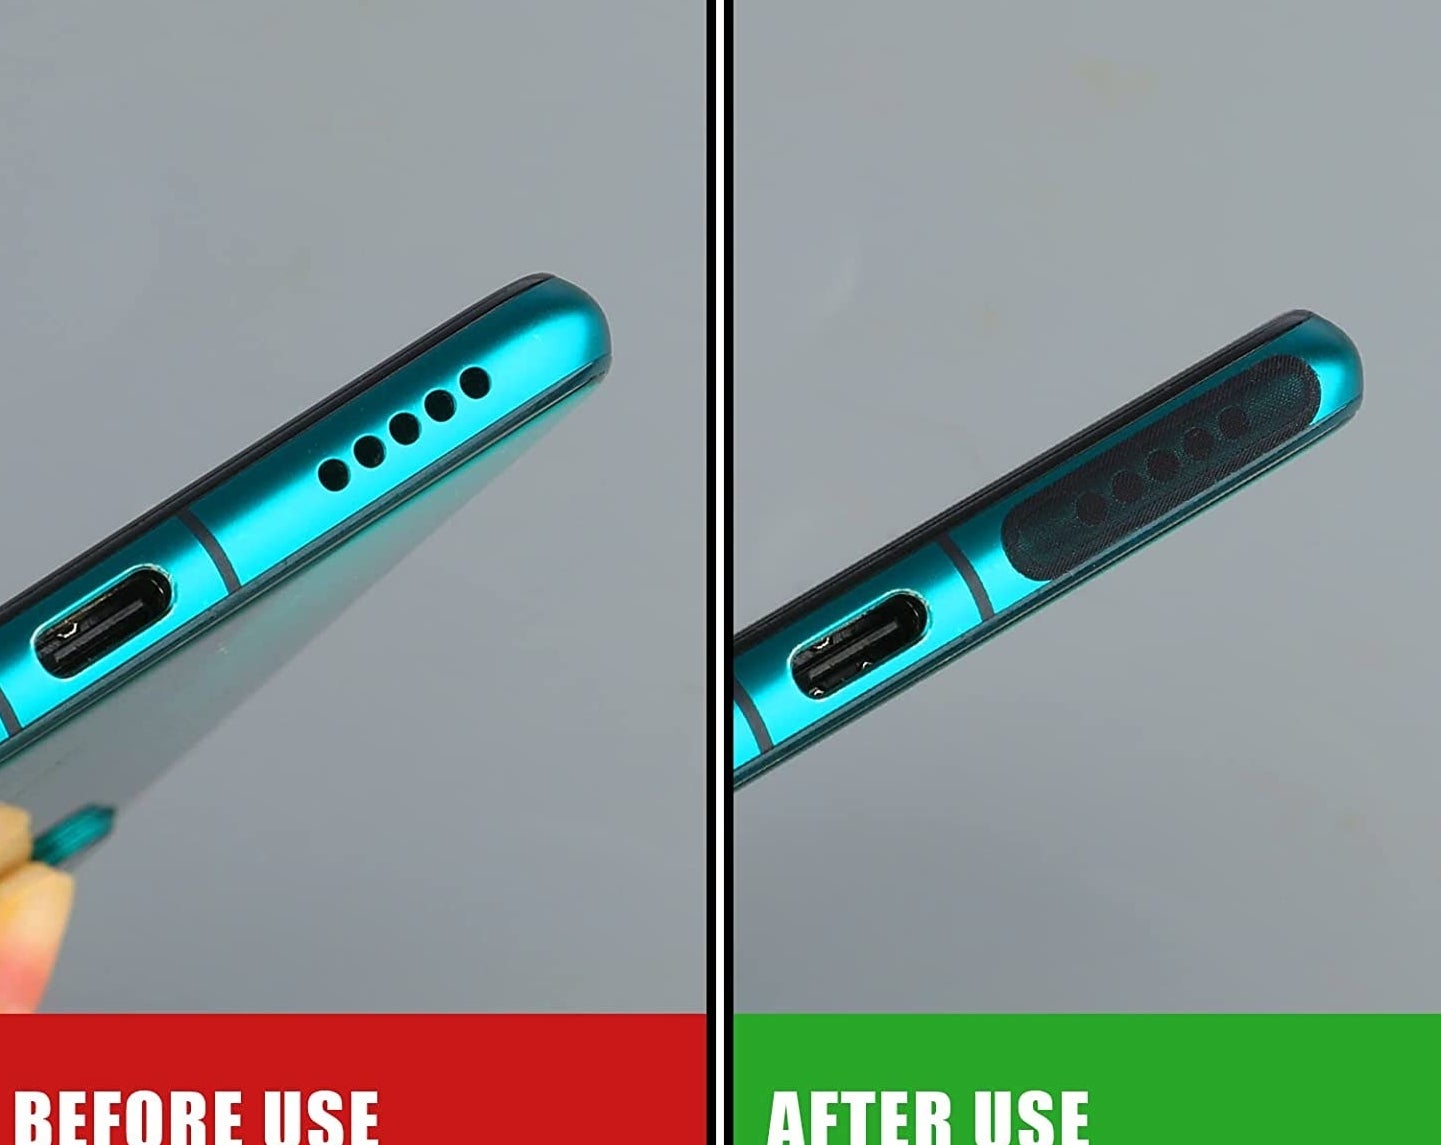 a photoset showing the before and after of using the stickers on a phone